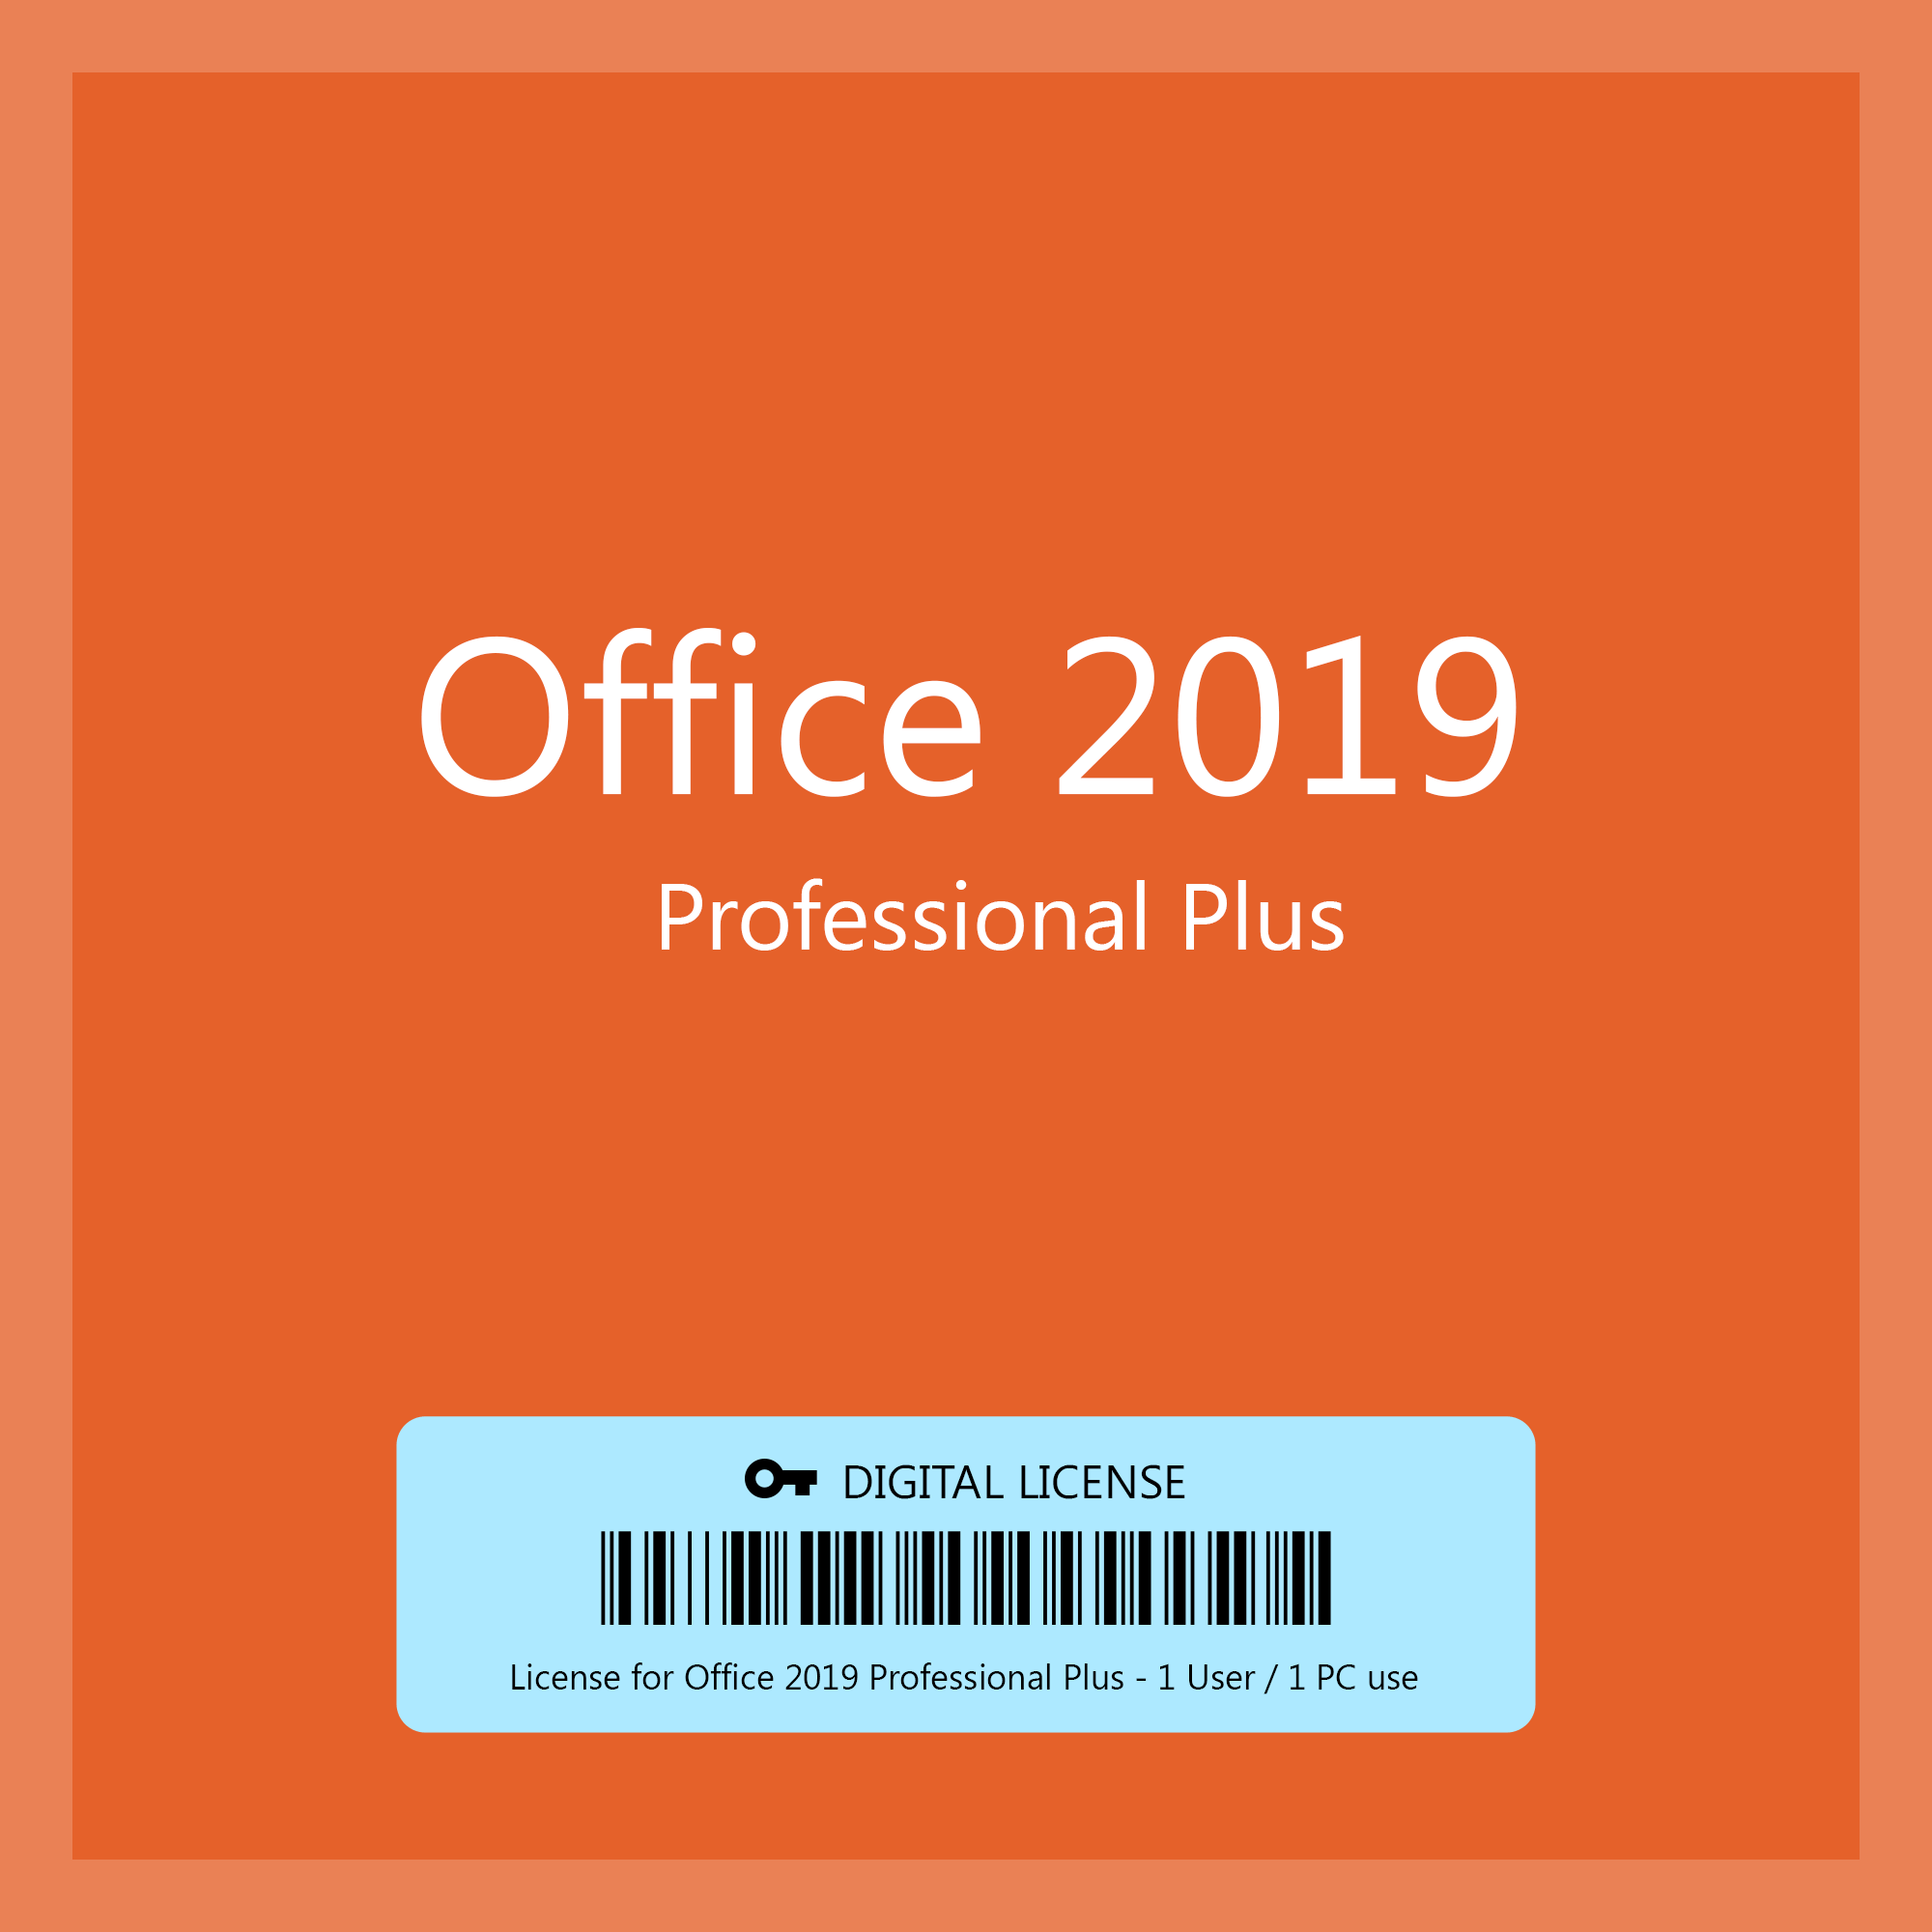 office-2019-professional-plus_1024x1024@2x.png